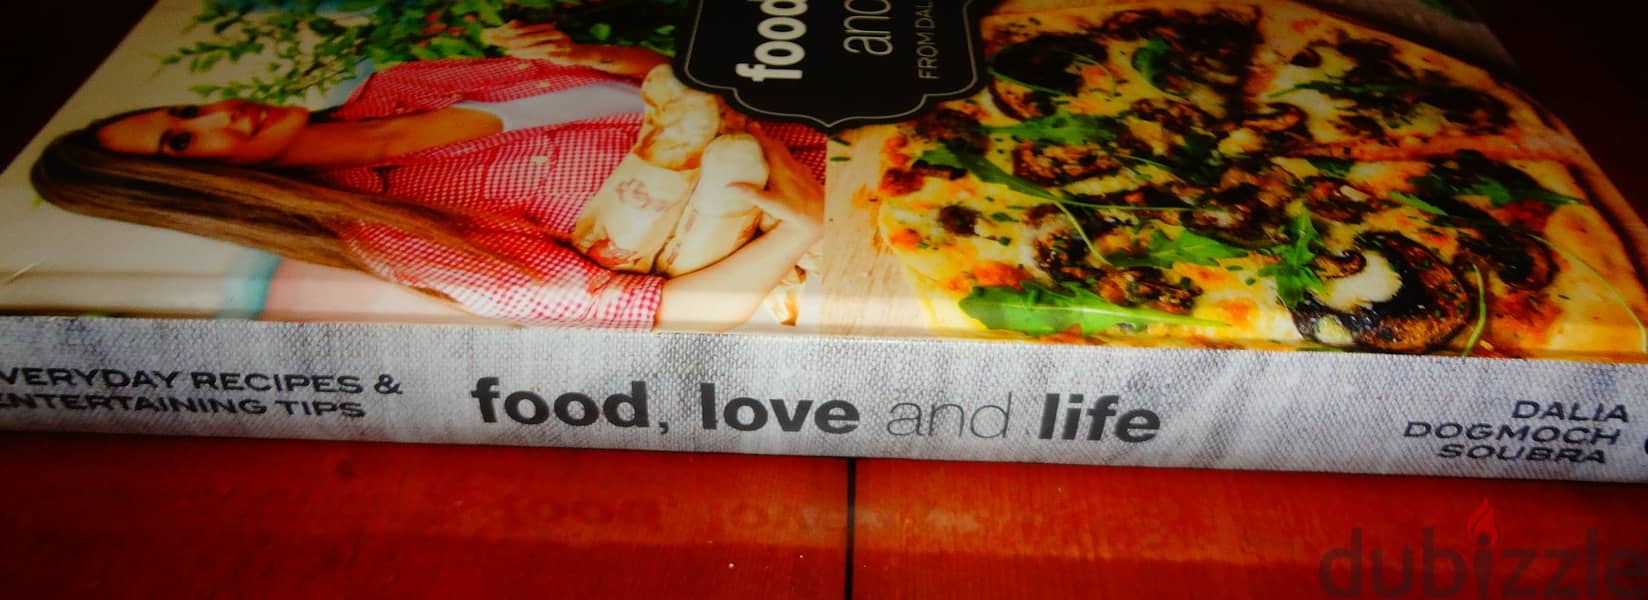 Food love and life cook book by Dalia Soubra 2